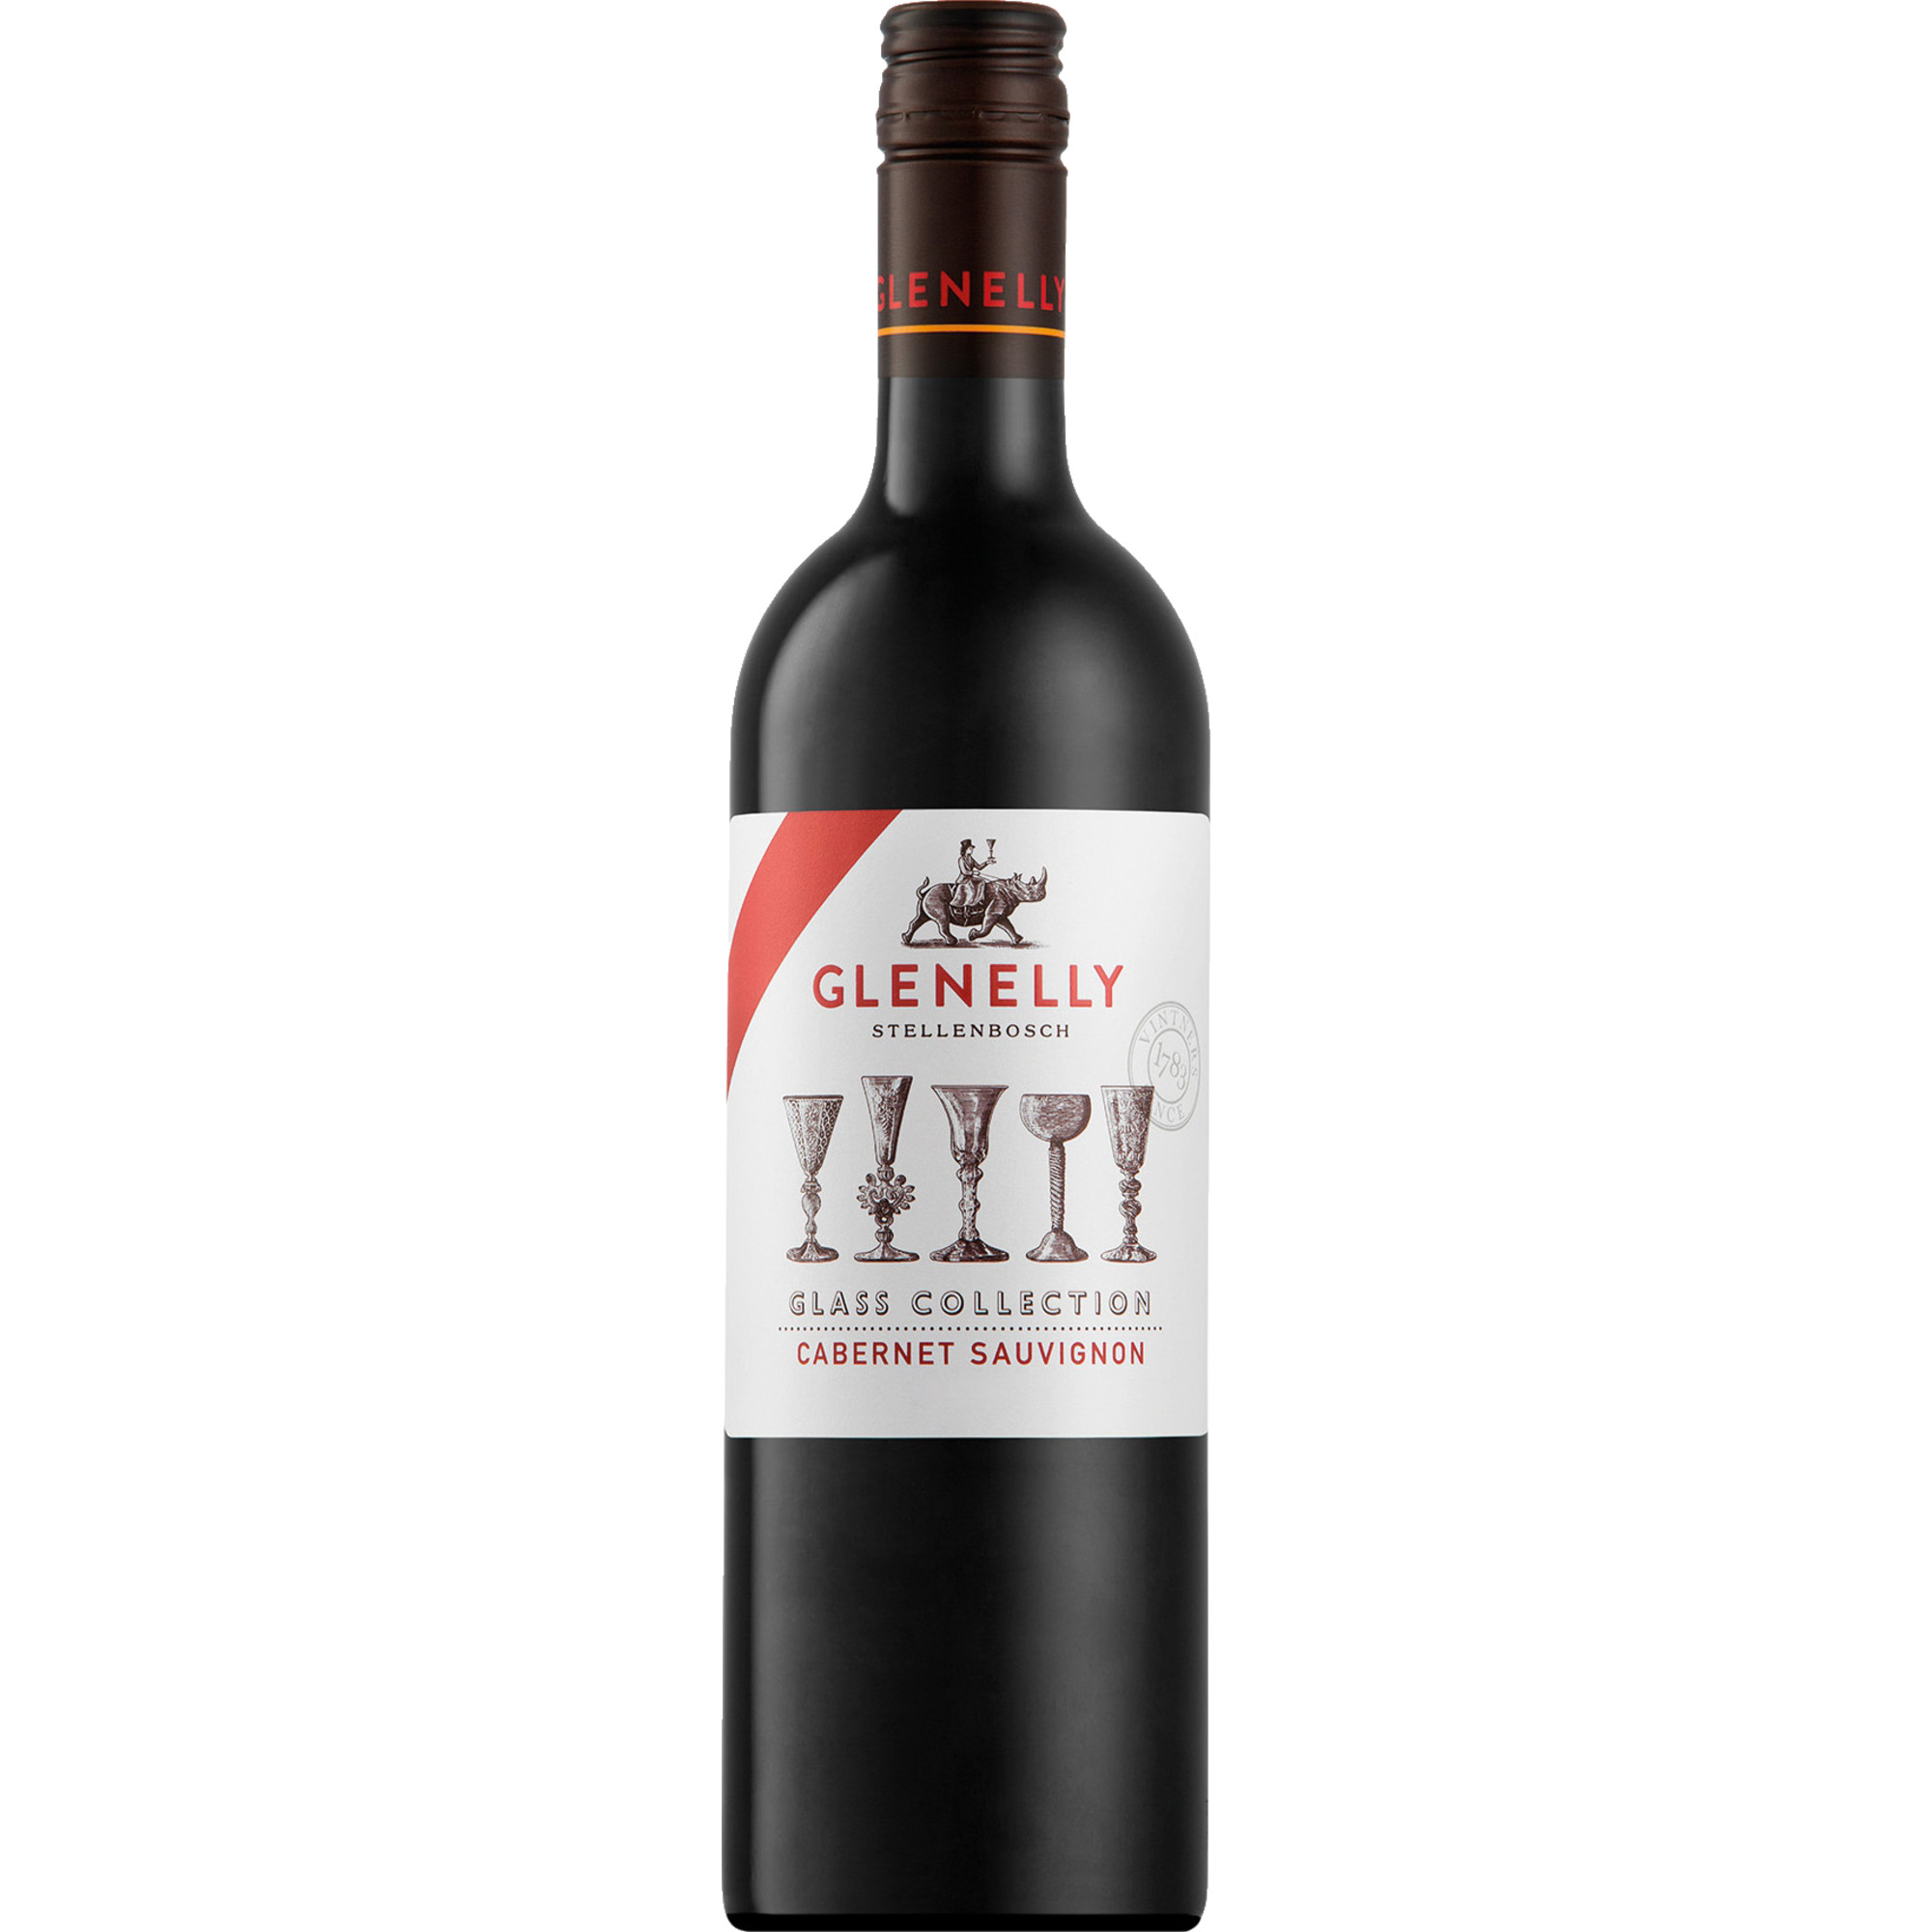 Image of Glenelly Glass Collection Cabernet Sauvignon 2019